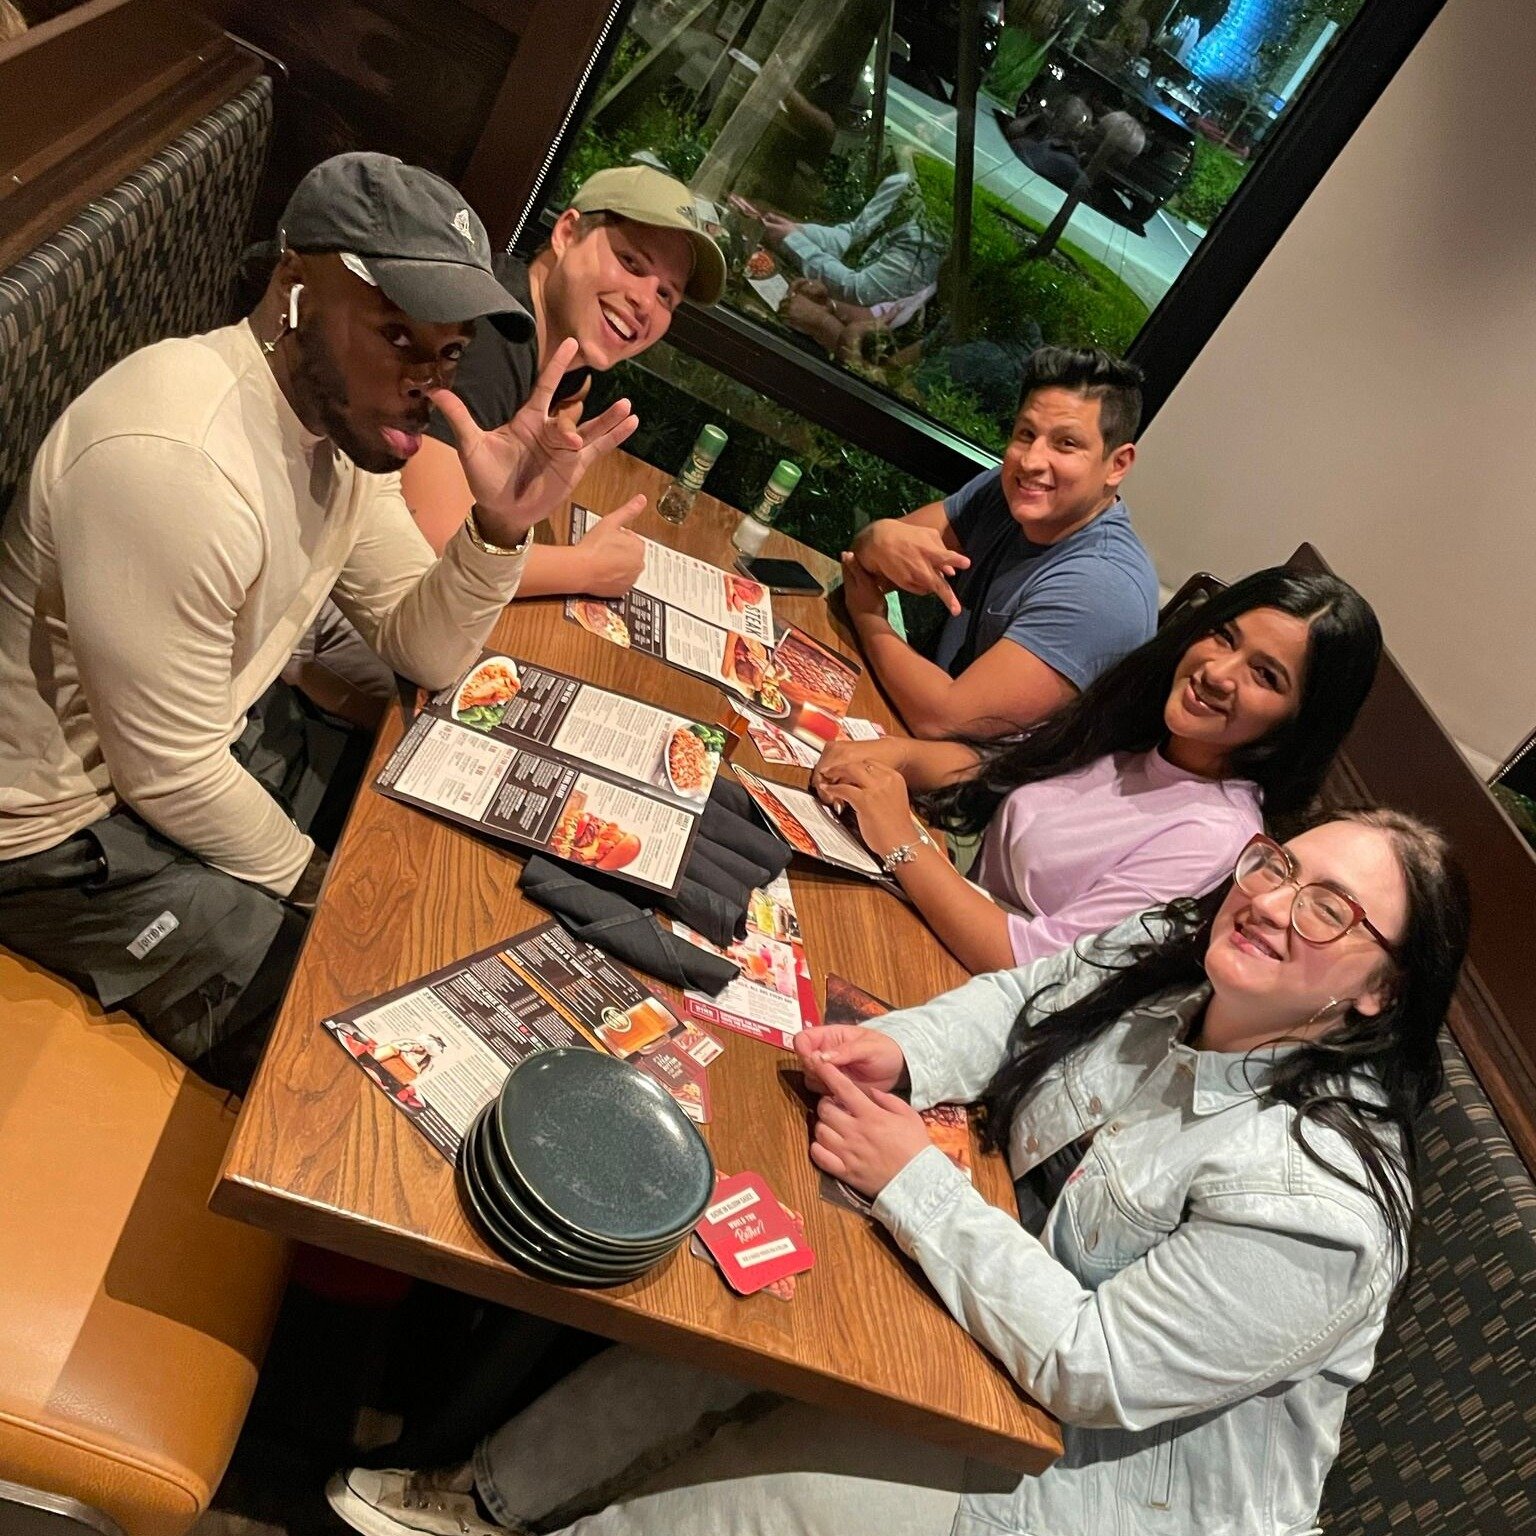 Can't go wrong with Outback Steakhouse 🥩 Dinner with the Texas crew!

#thecarvonisgroup #teamdinner #dallas #northtexas #funnight #tcgdallas